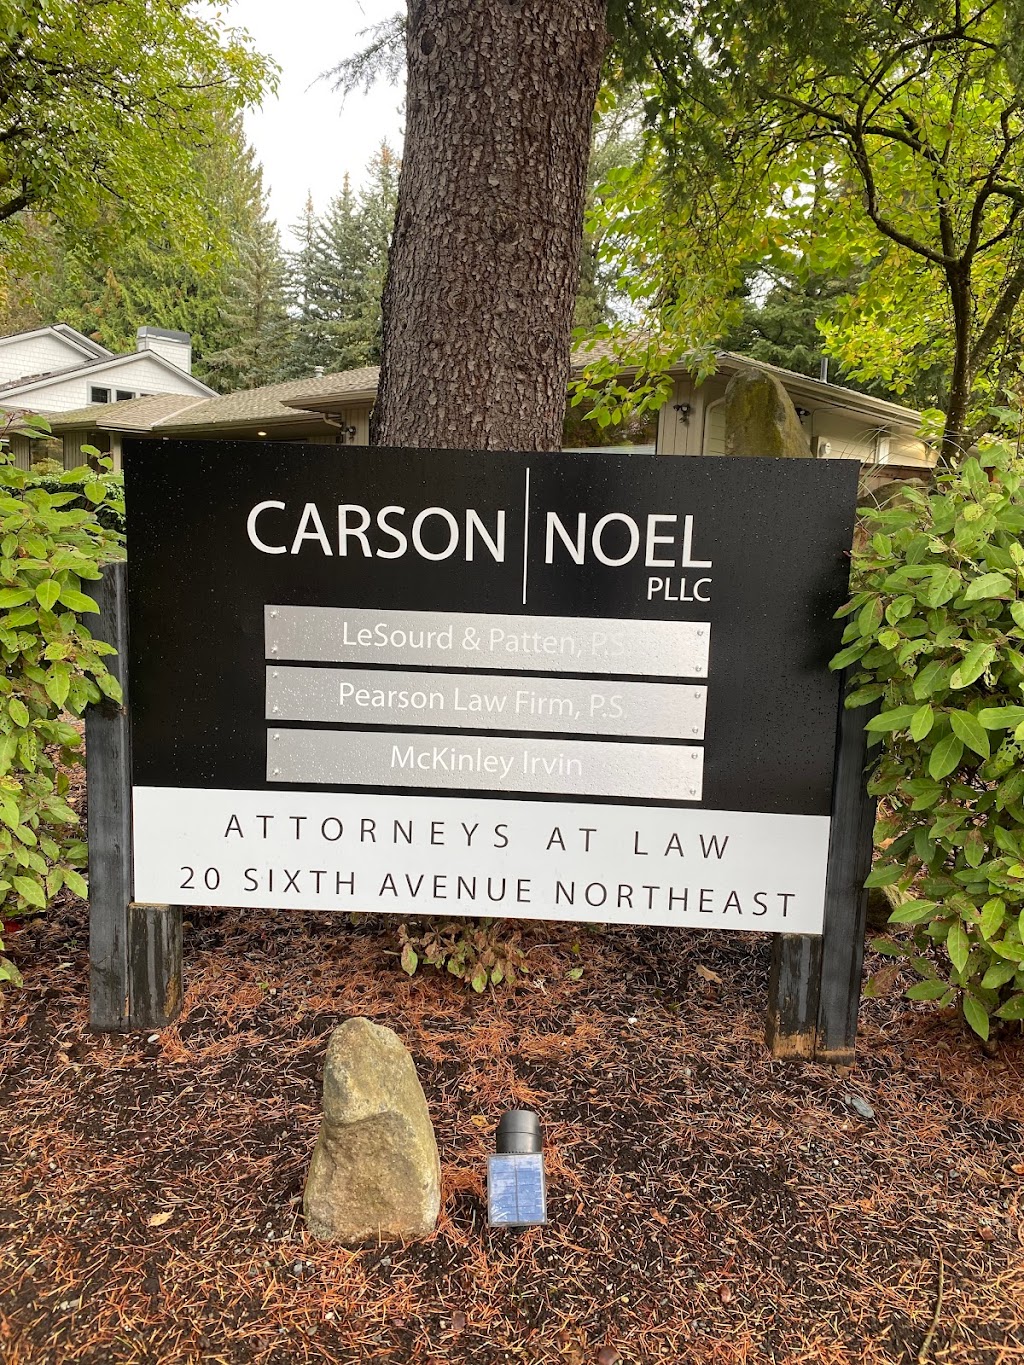 The Pearson Law Firm, P.S. | 20 6th Ave NE, Issaquah, WA 98027 | Phone: (425) 831-3100